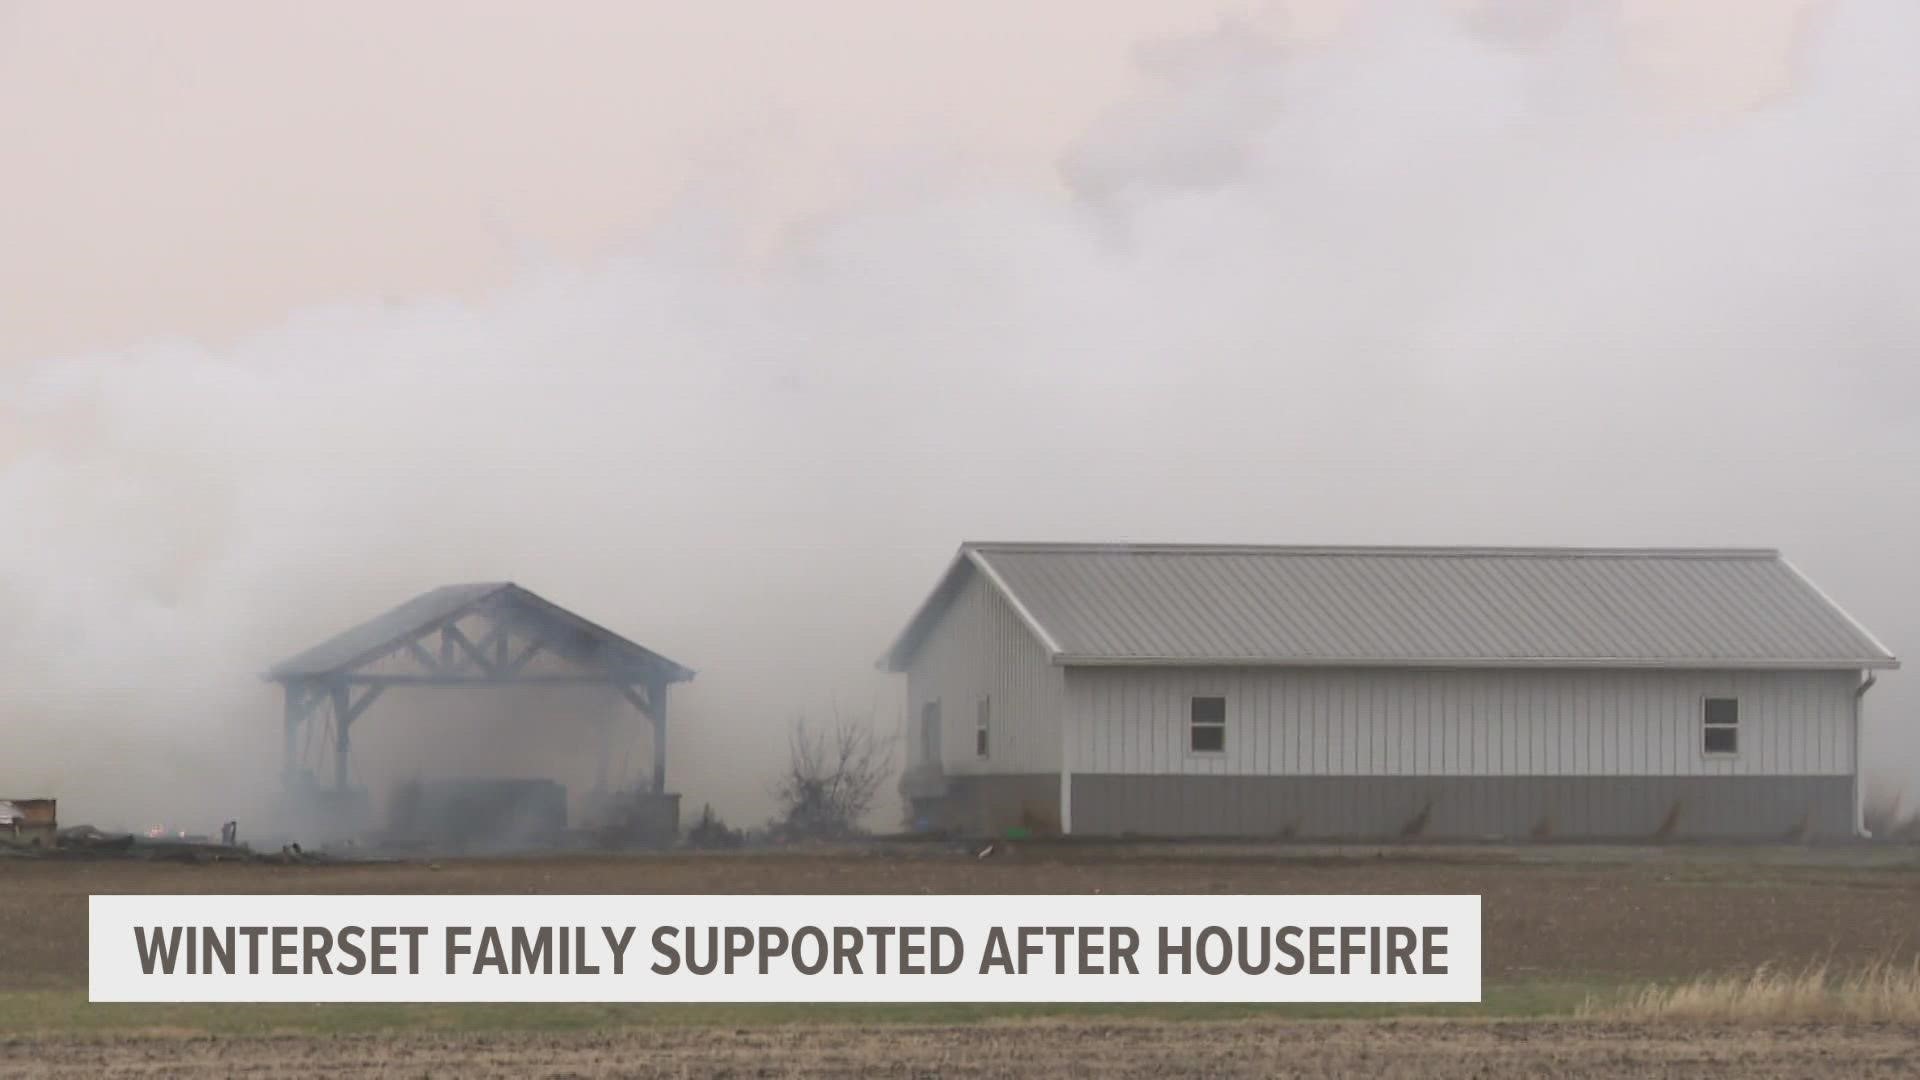 The Winterset community is helping out a local first responder after a house fire. Here's how officials think this fire started.